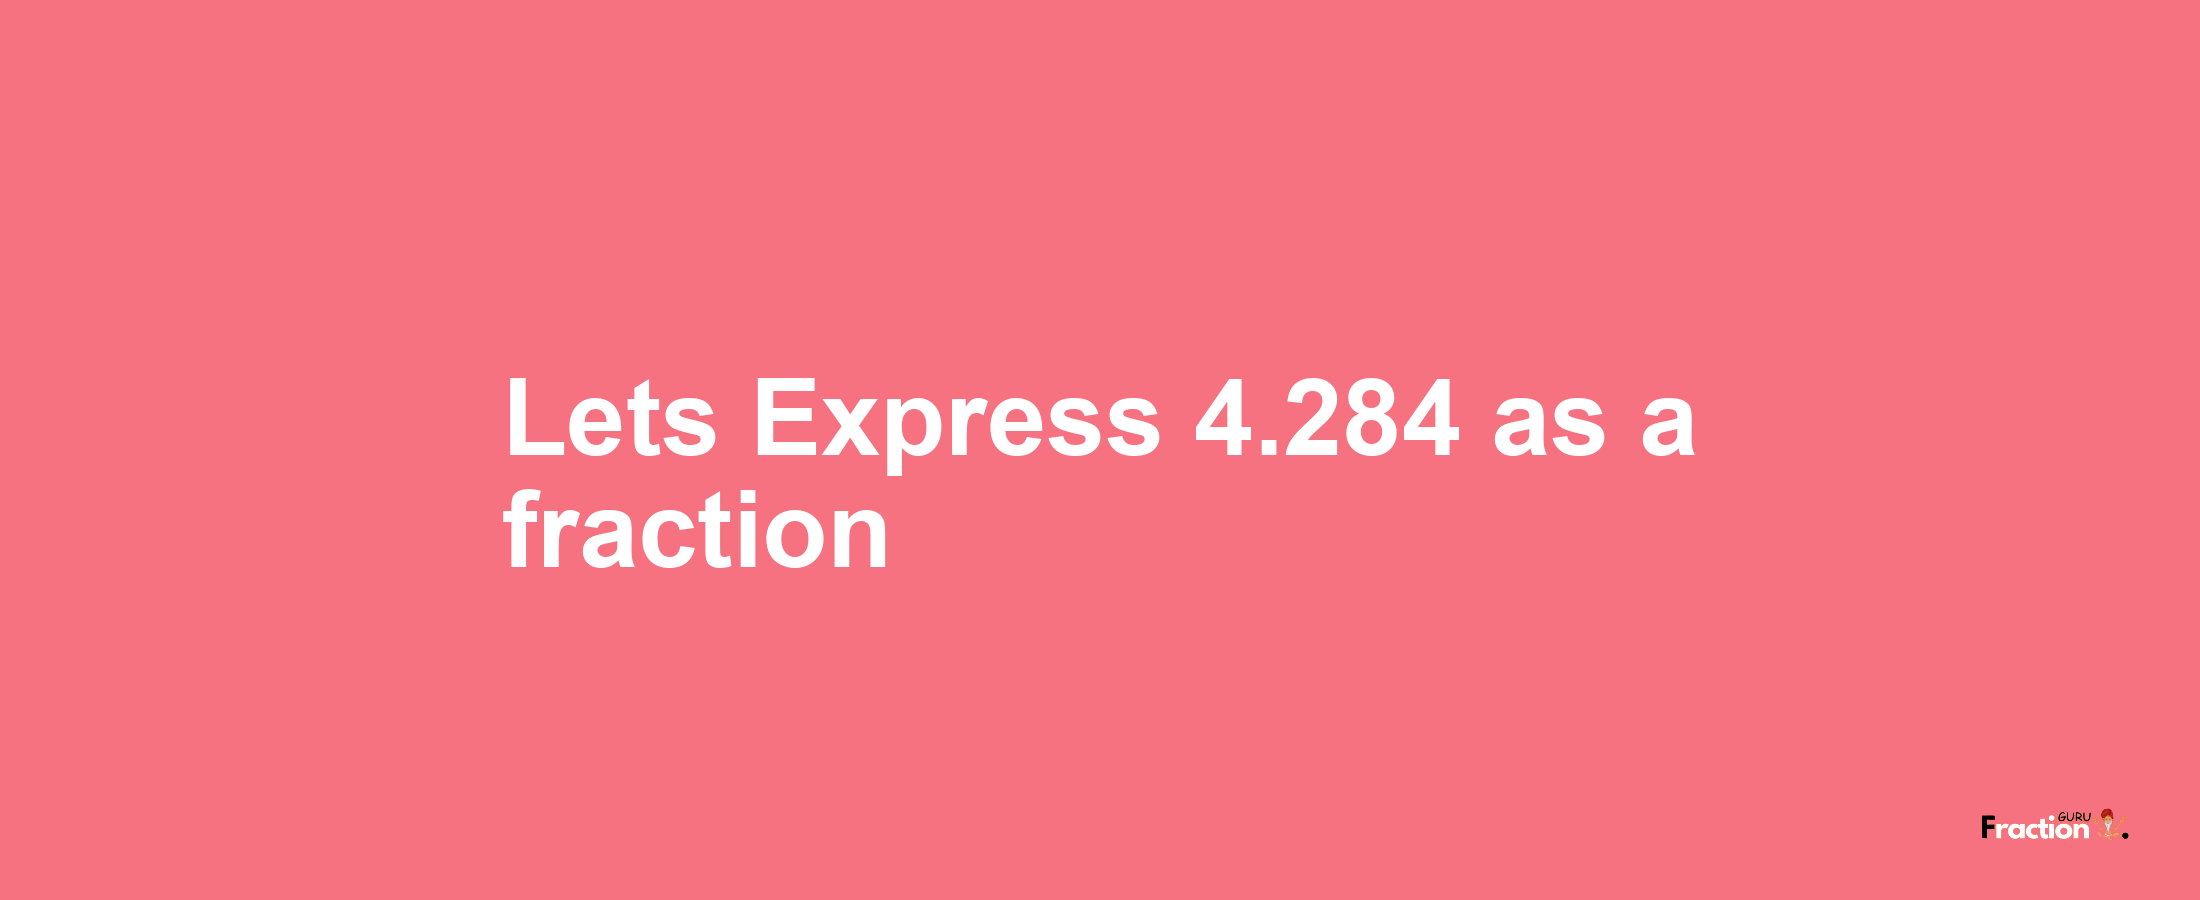 Lets Express 4.284 as afraction